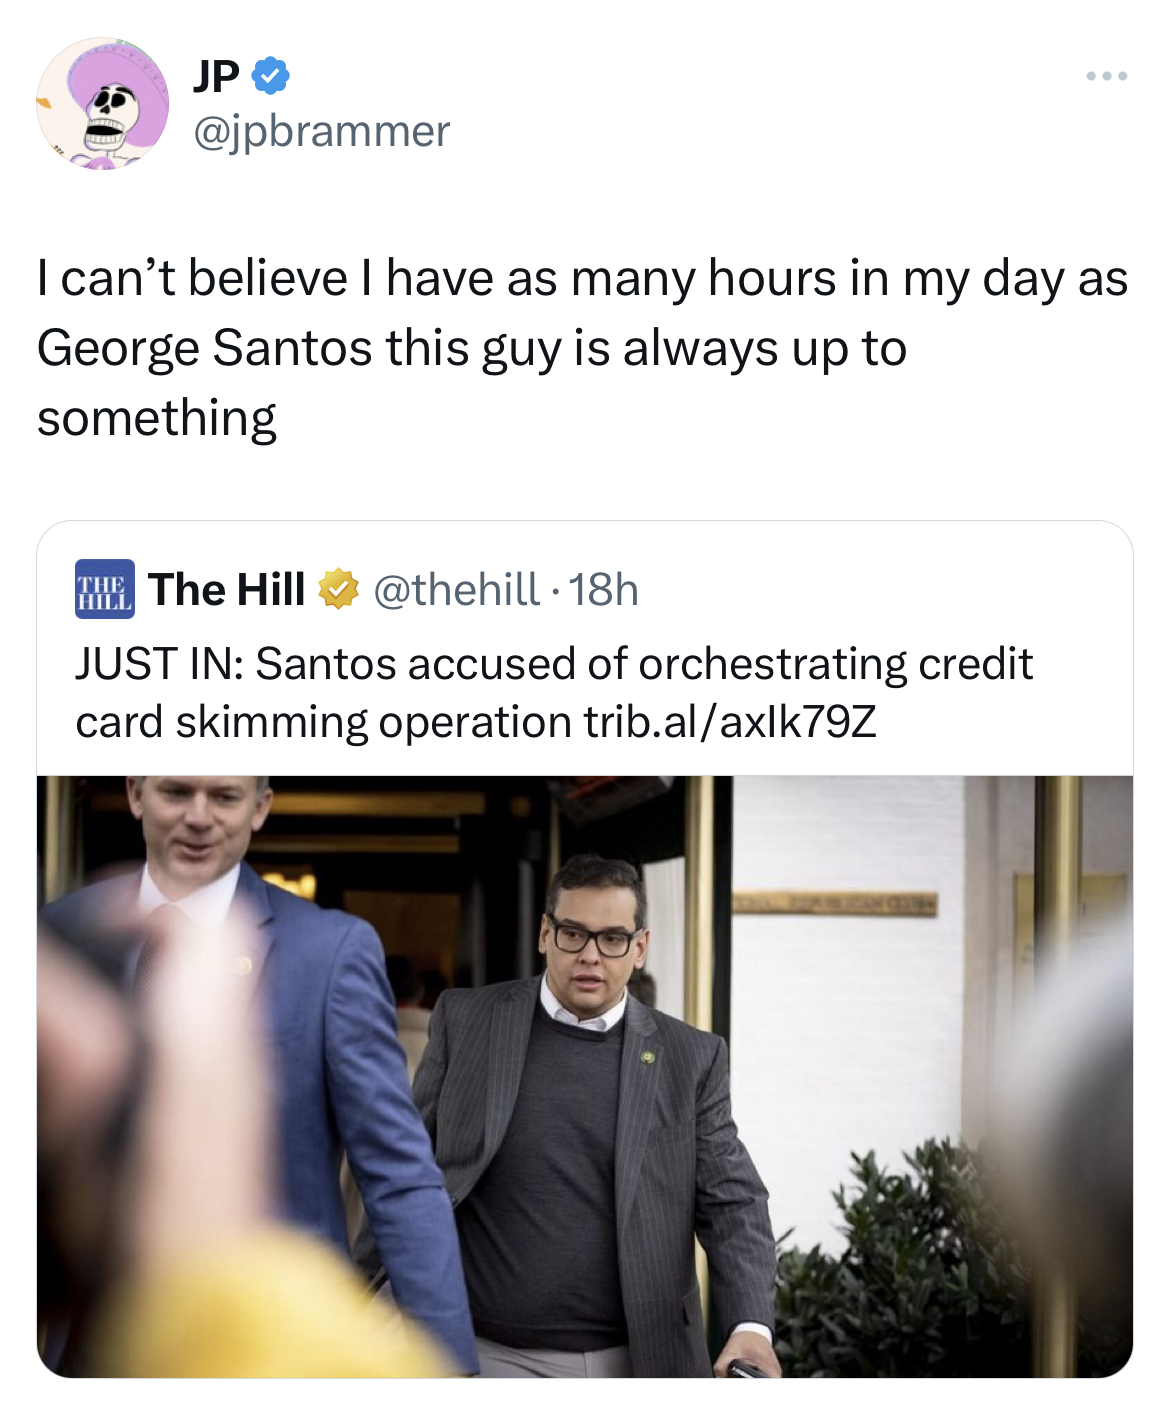 savage tweets roasting celebs - conversation - Jp I can't believe I have as many hours in my day as George Santos this guy is always up to something The Hill Just In Santos accused of orchestrating credit card skimming operation trib.alaxlk79Z